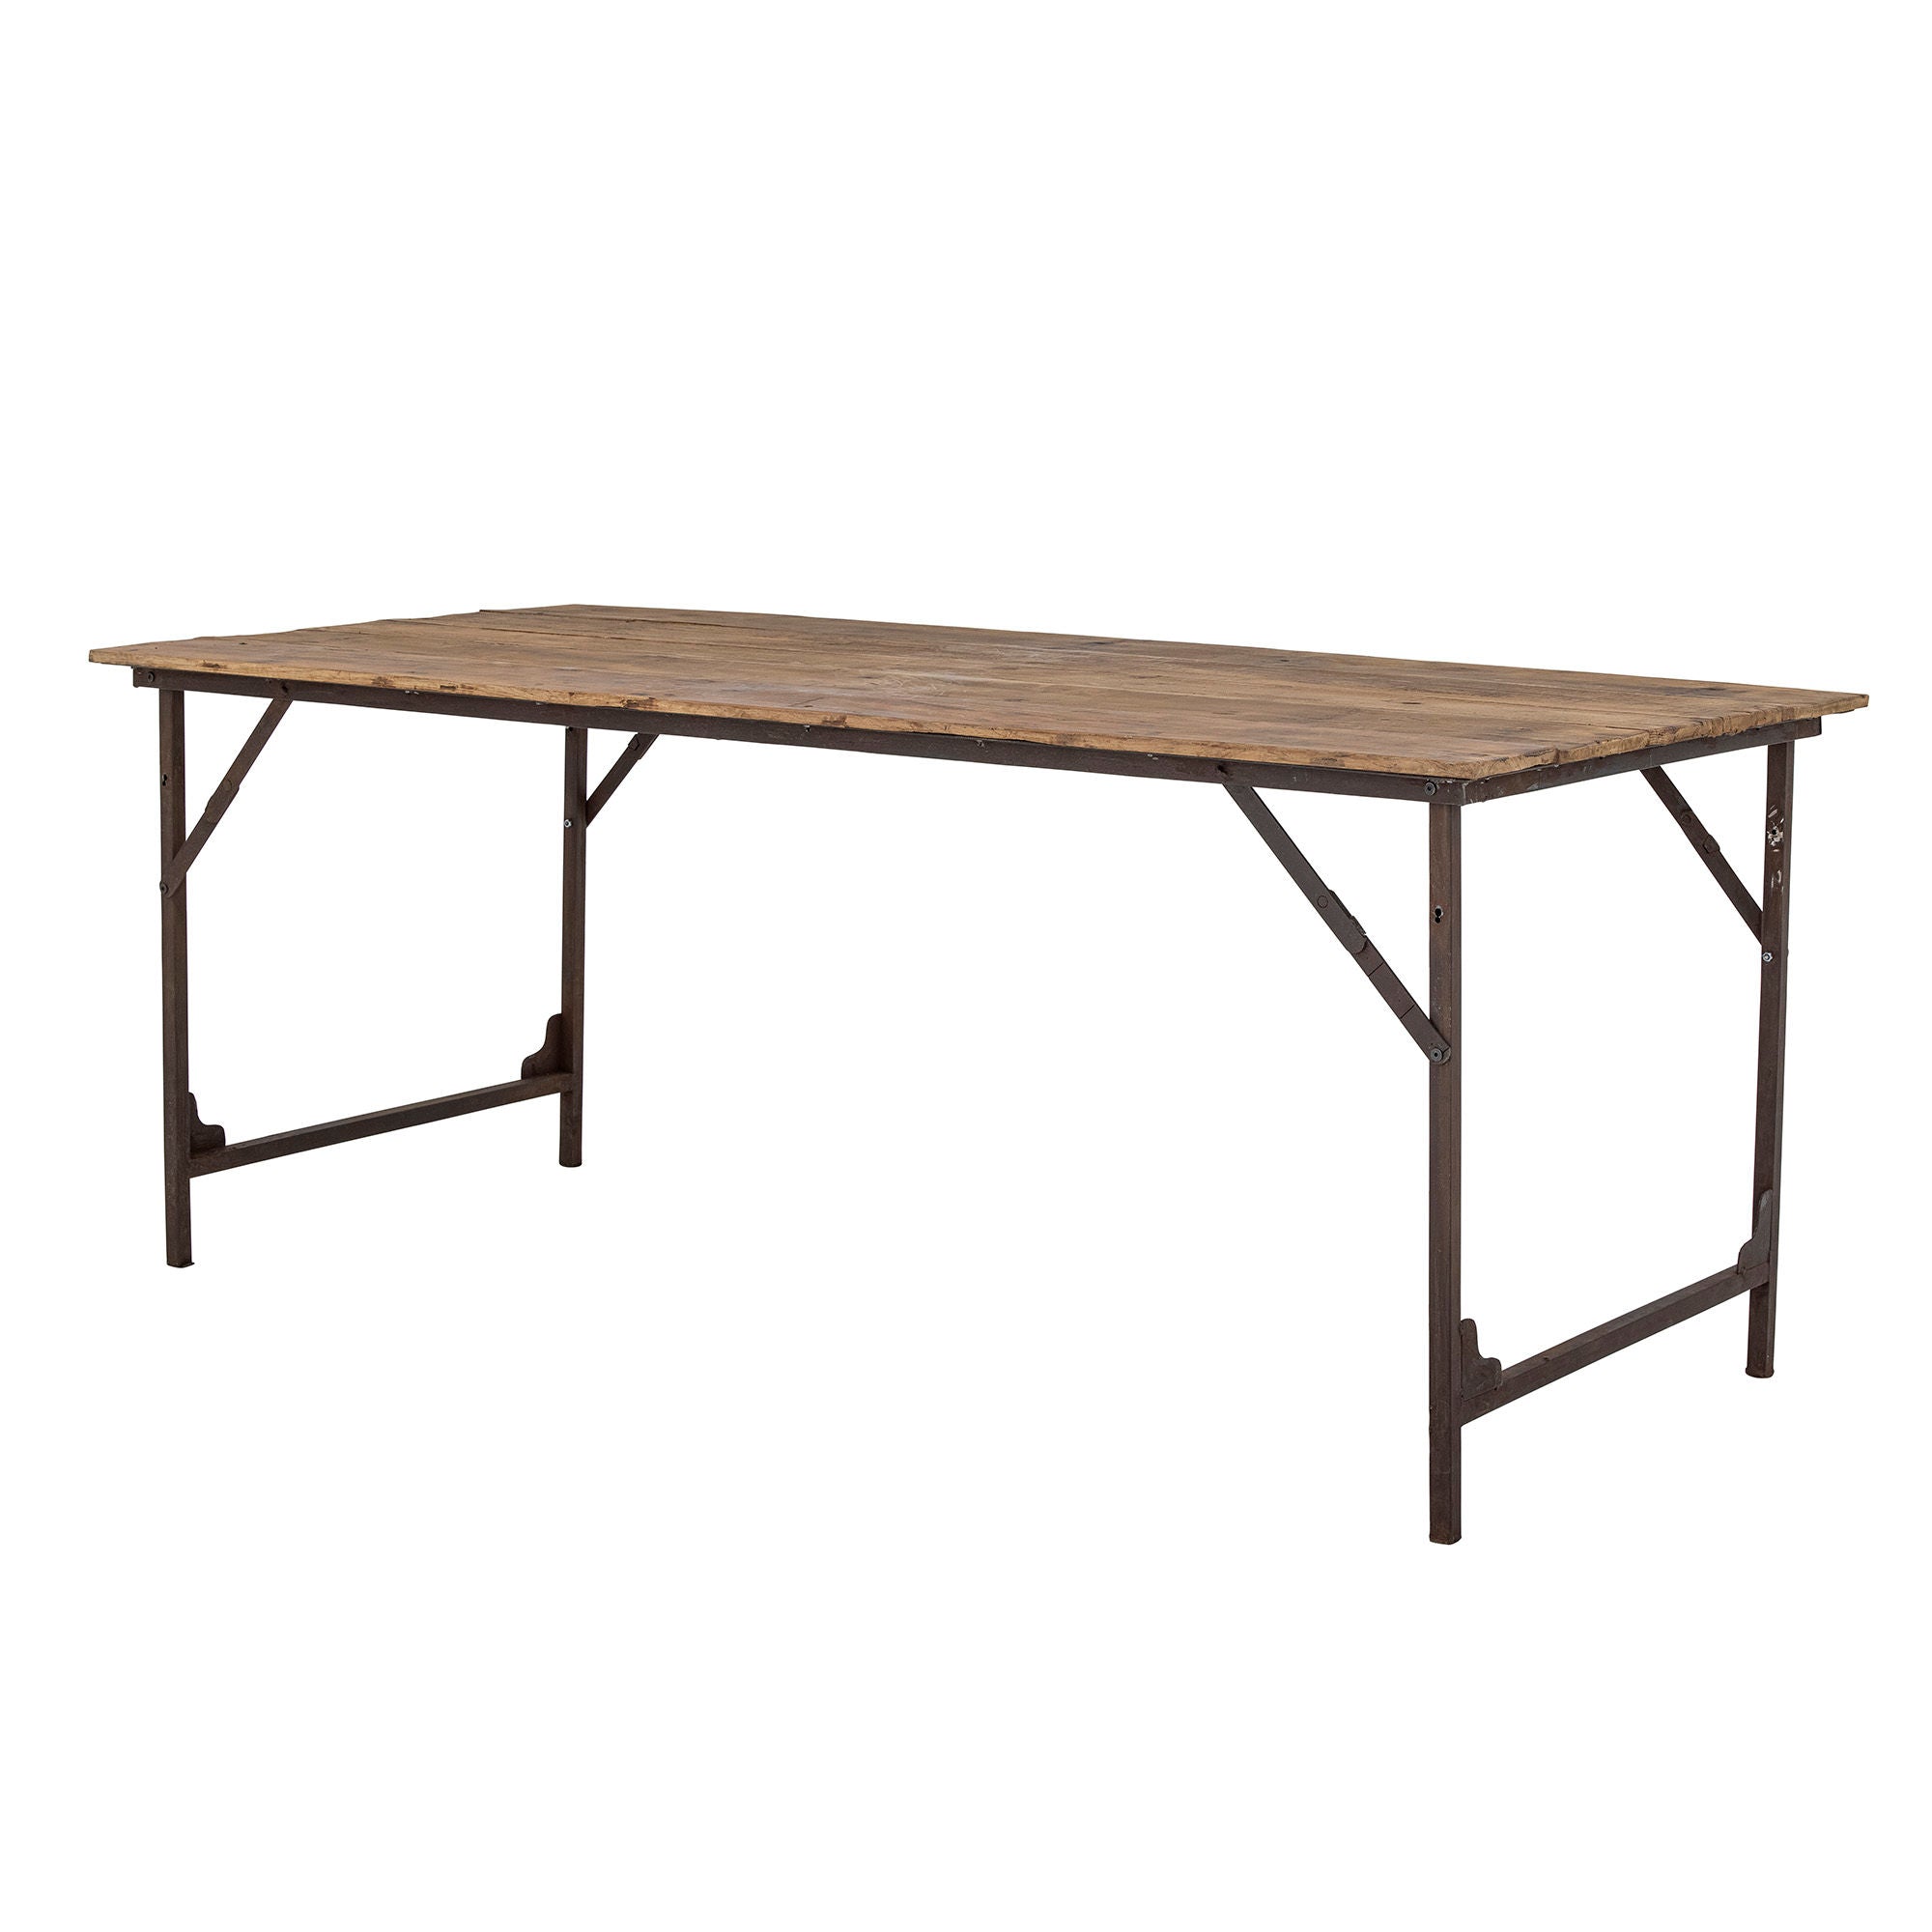 Creative Collection Loft Dining Table, Brown, Reclaimed Wood